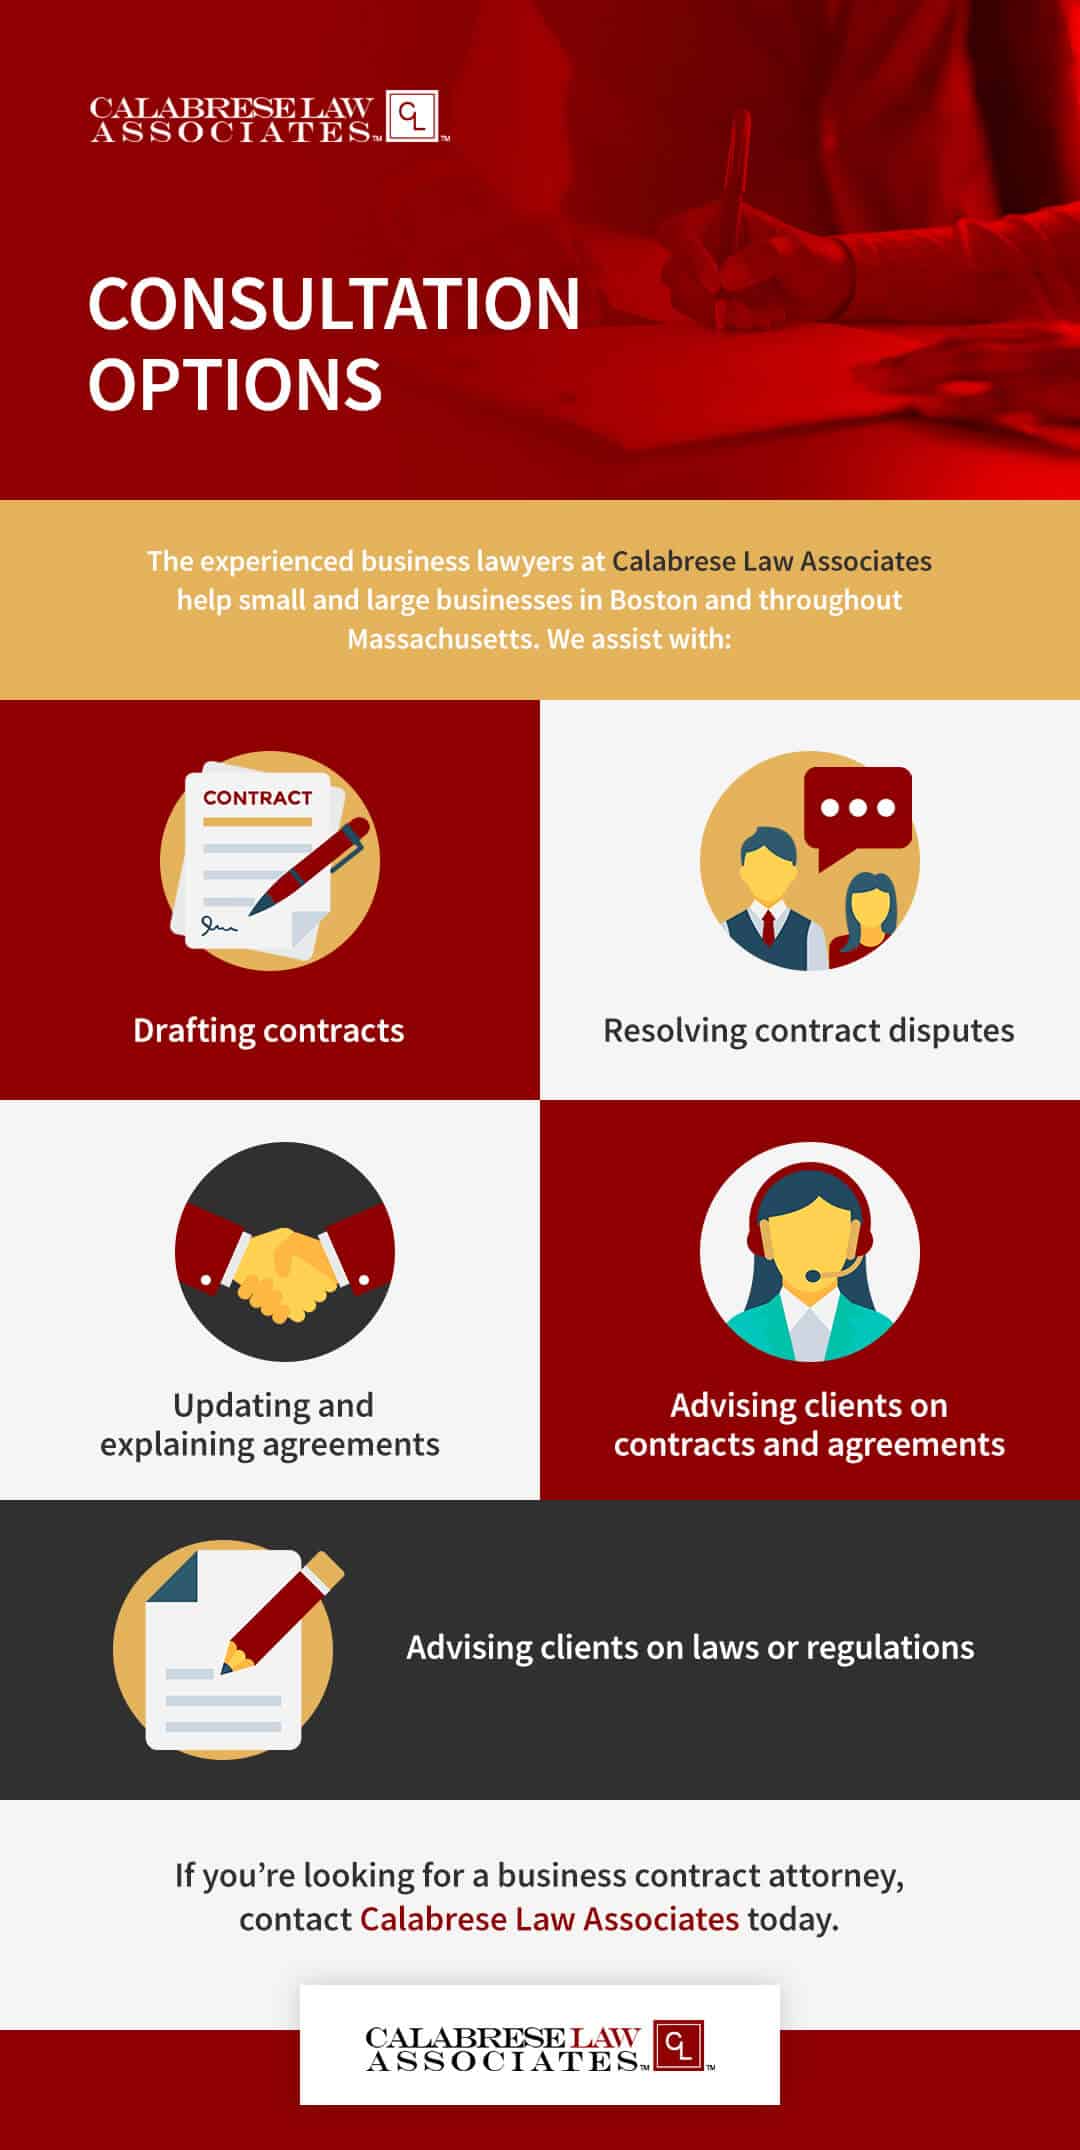 Calabrese Law Associates Consultation Options